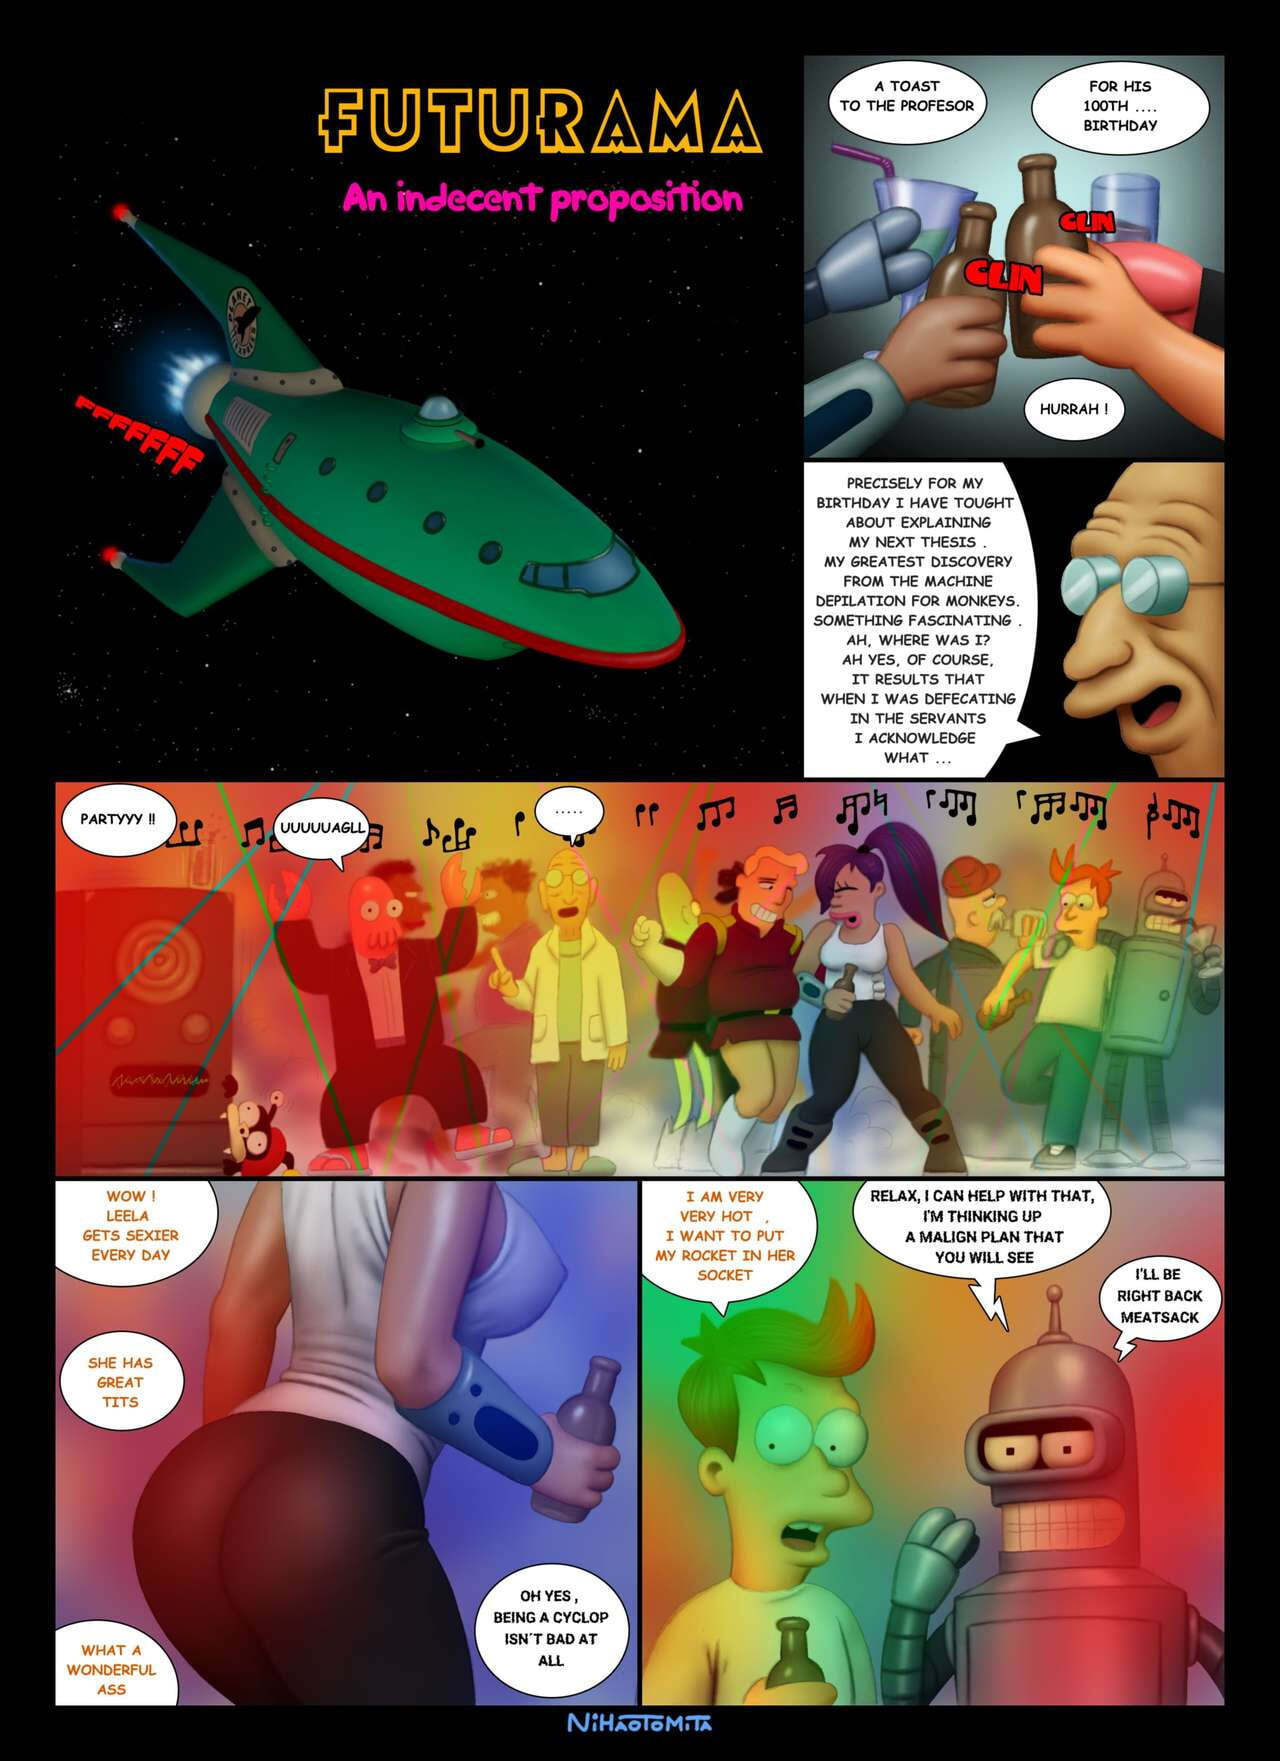 Futurama - An indecent proposition - Page 1